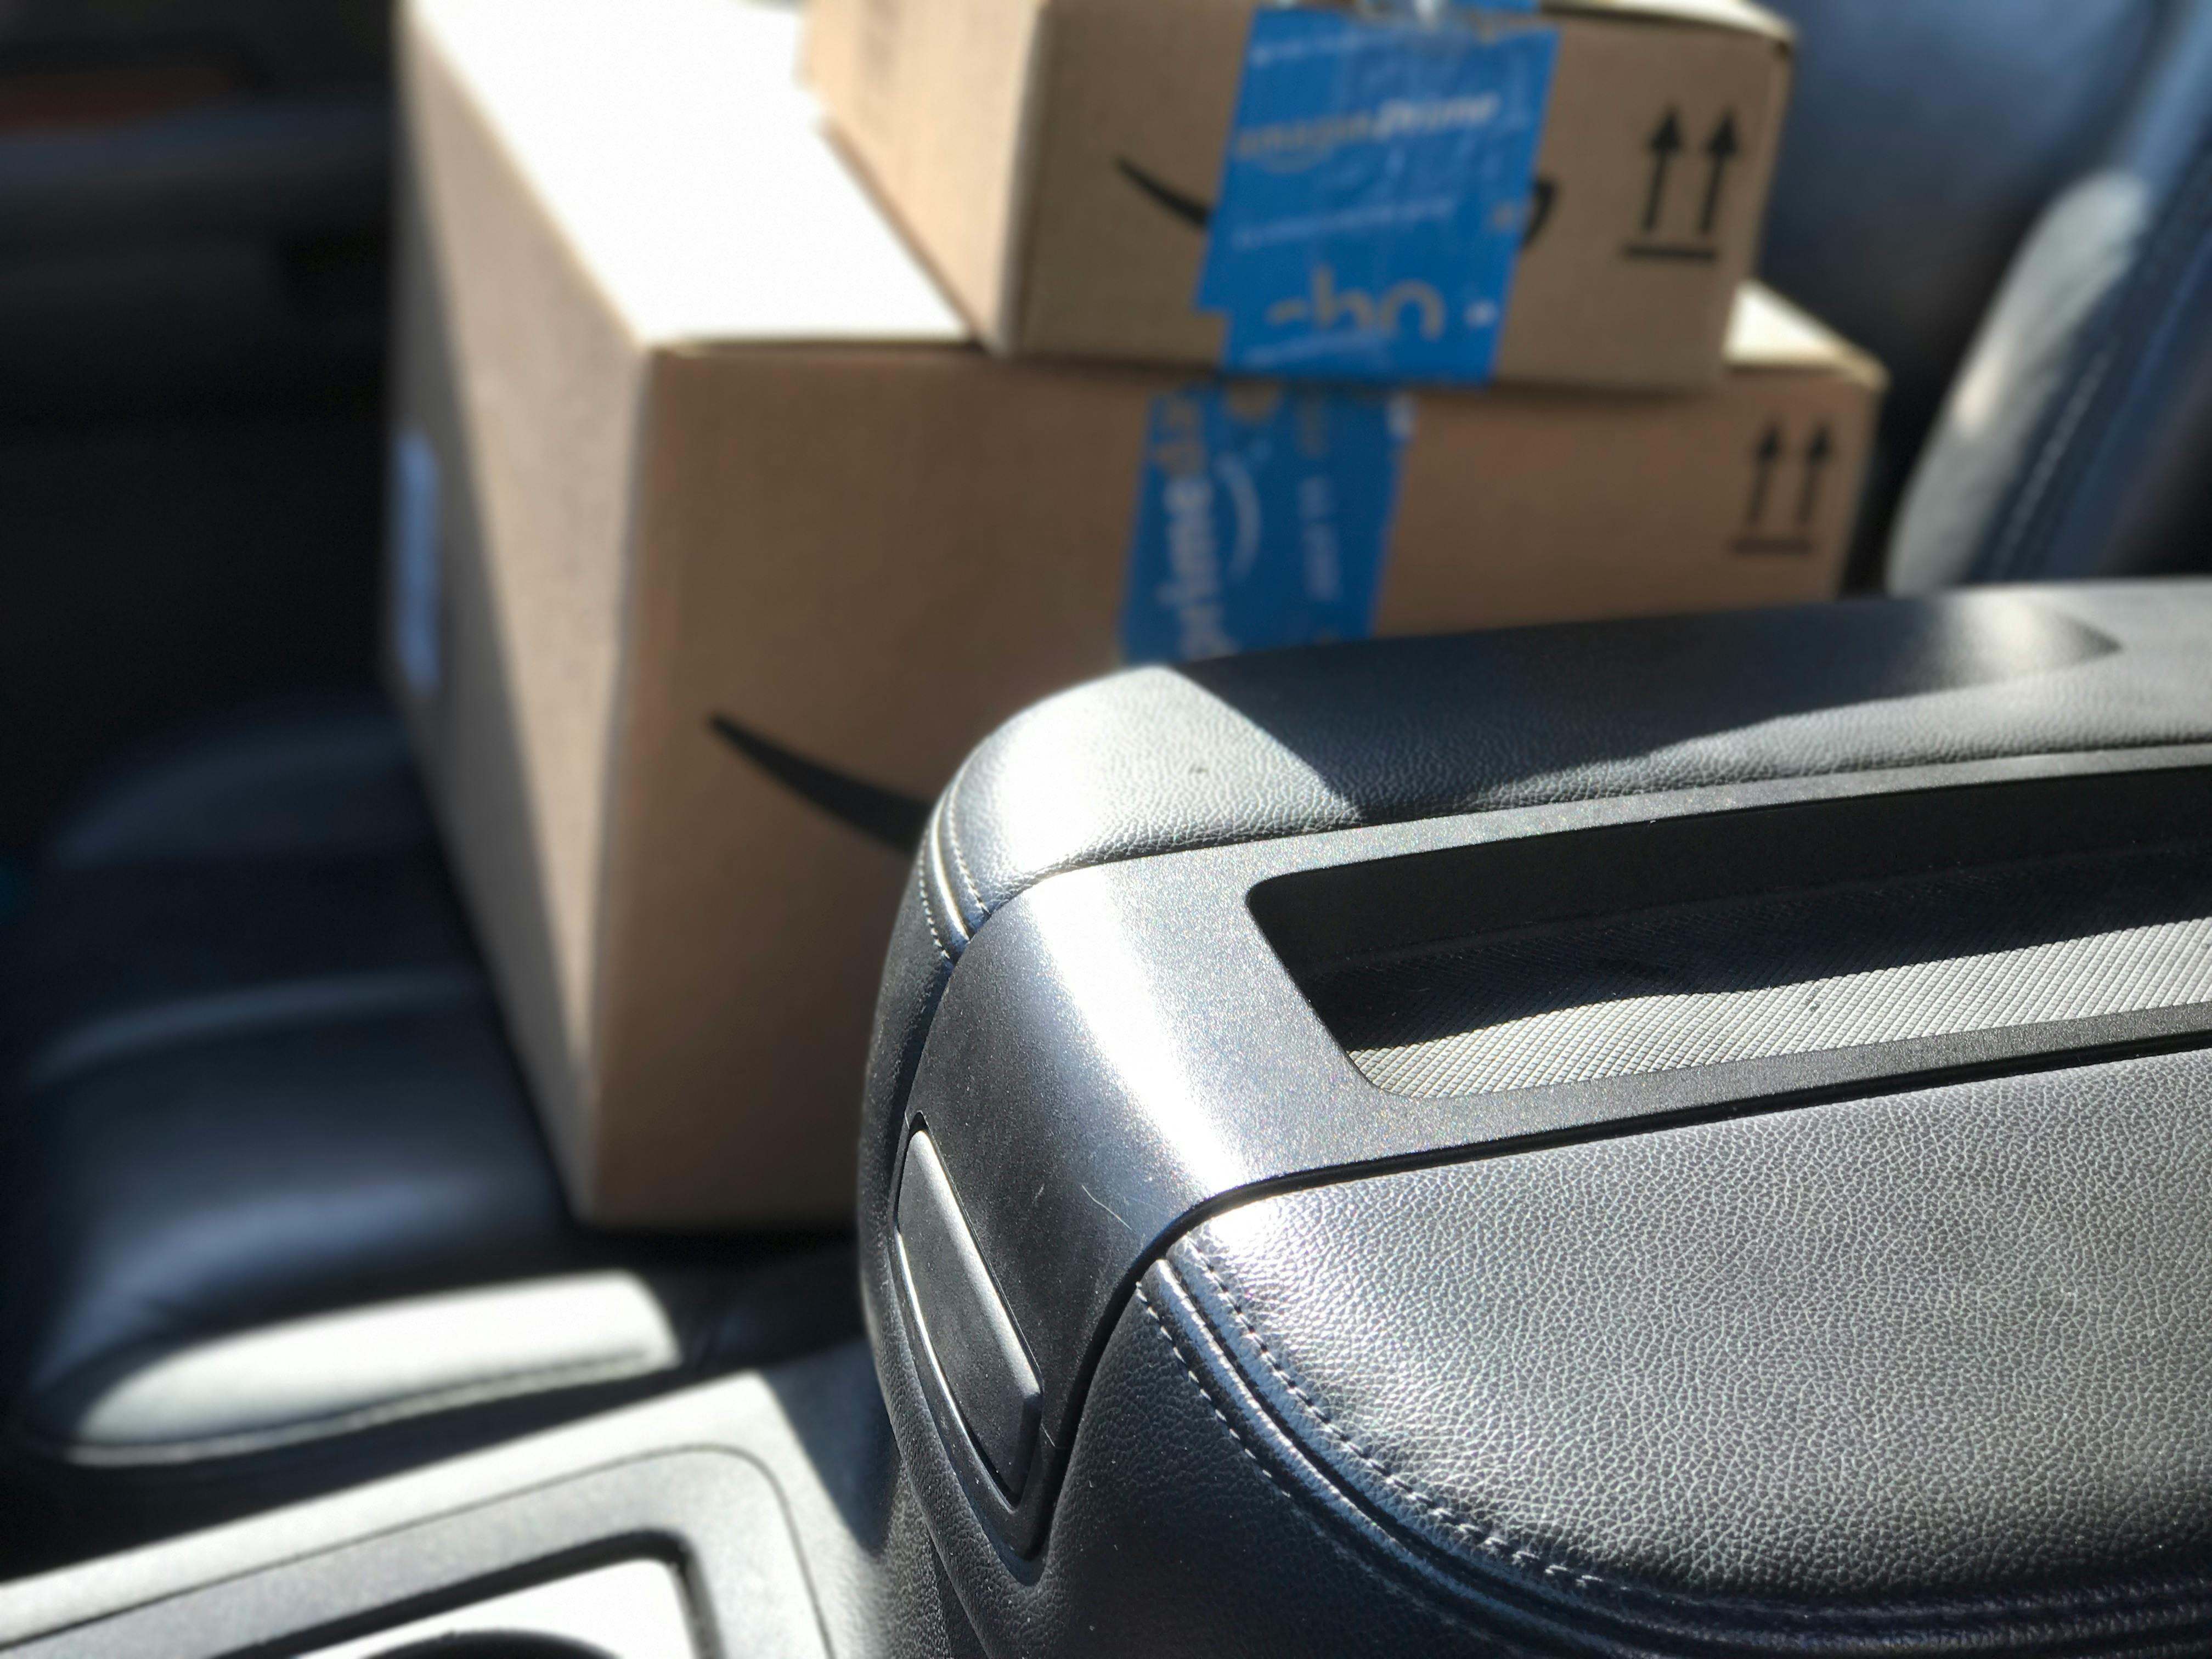 Two Amazon packages in the passenger seat of a vehicle.